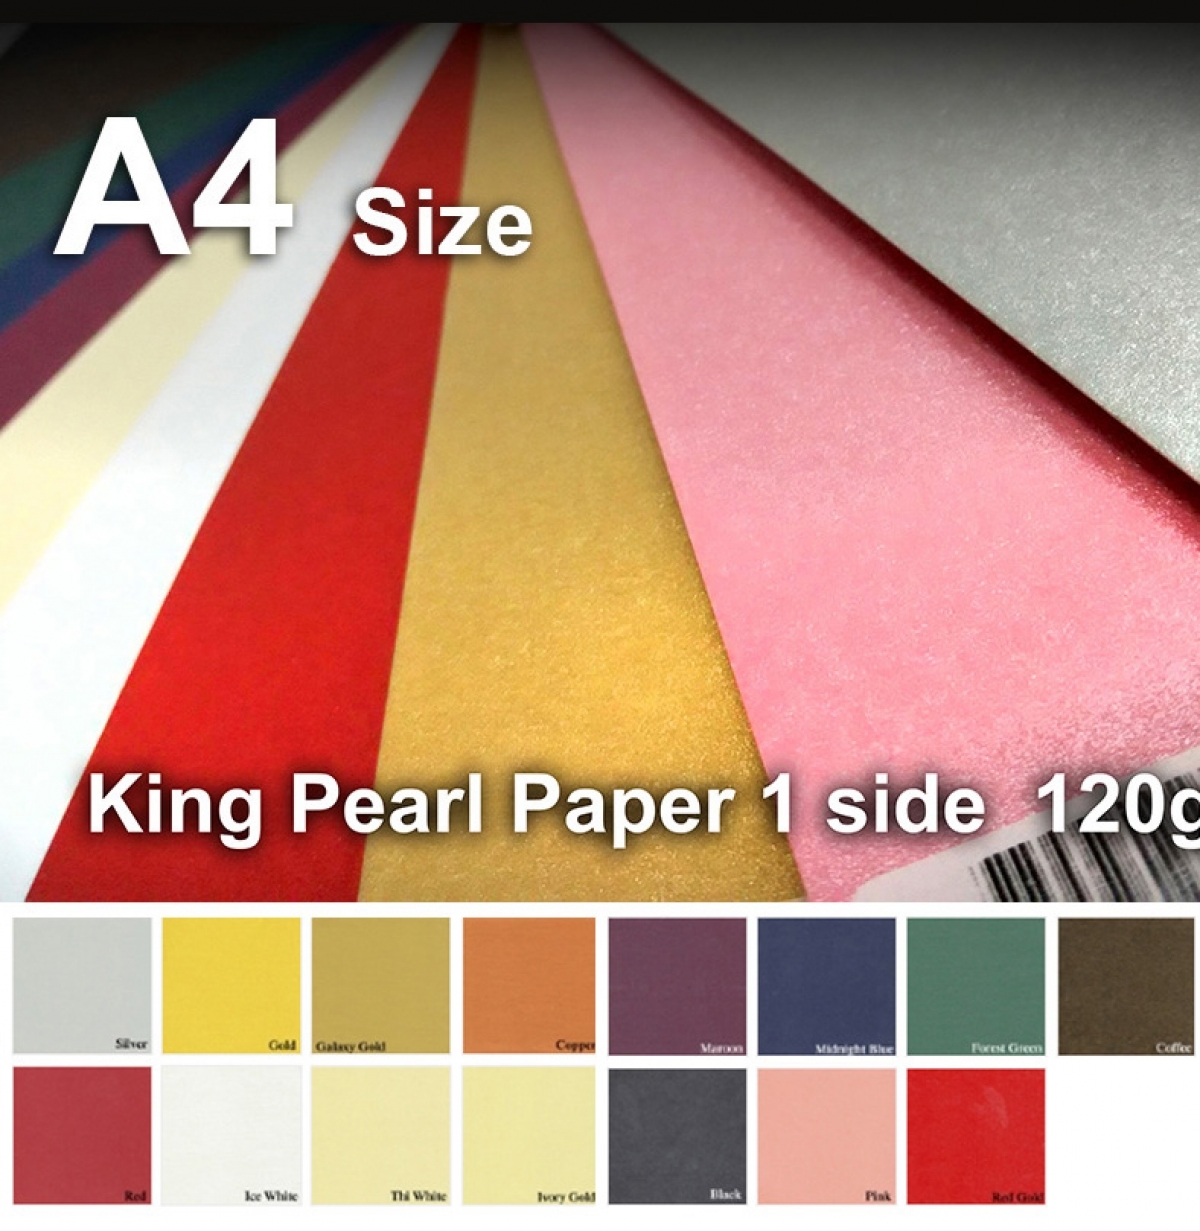  A4KPM40 King Pearl Paper 120gsm 1 Side A4 Size 